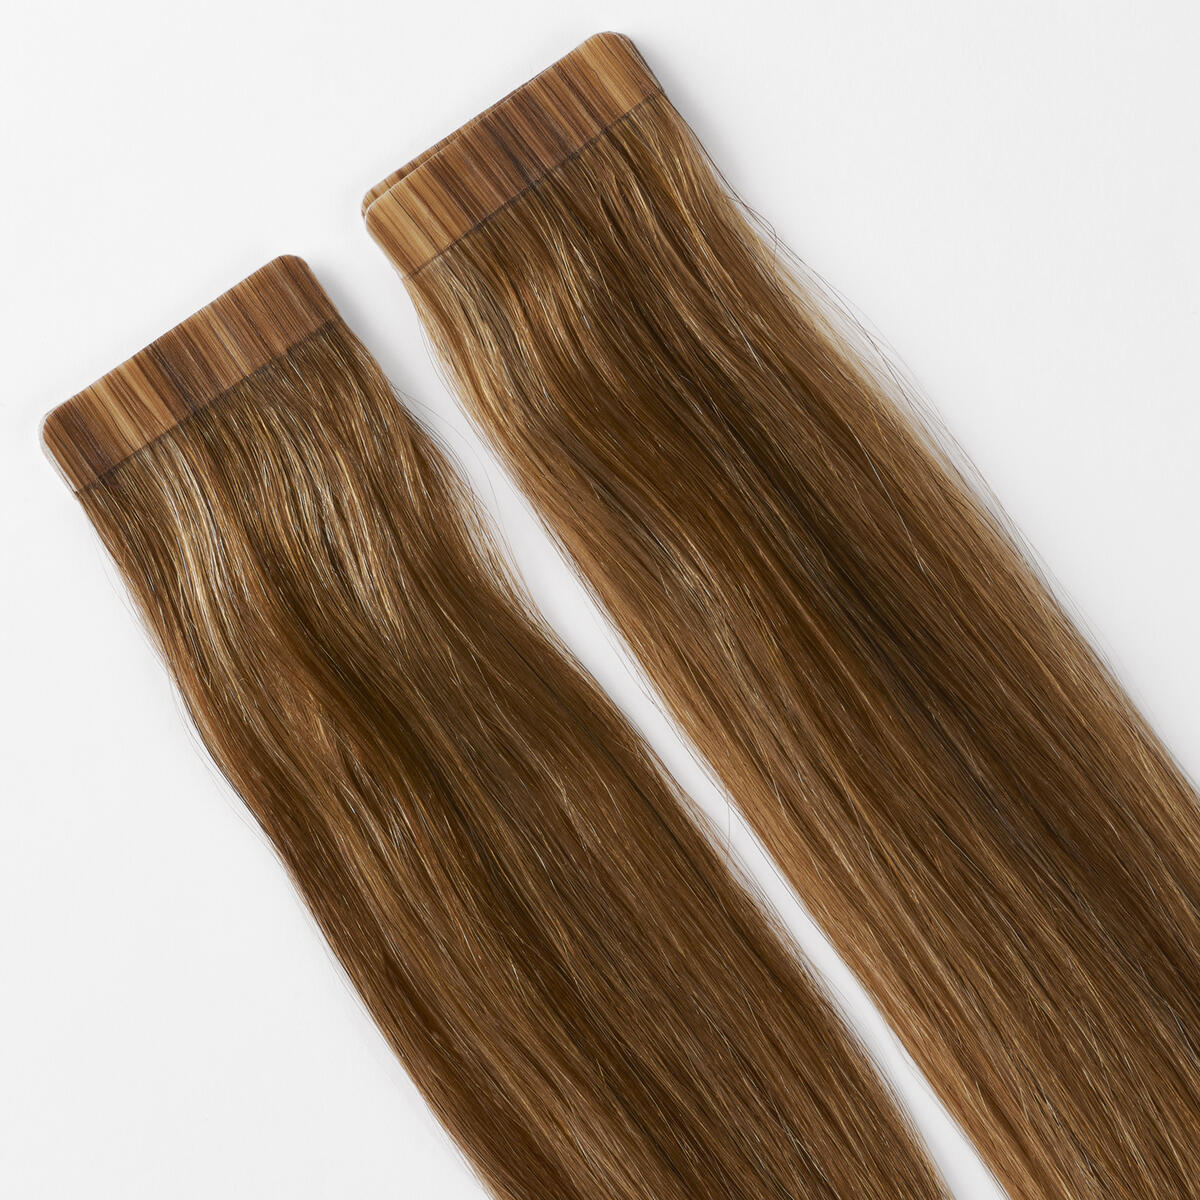 Basic Tape Extensions Classic 4 M5.0/7.4 Golden Brown Mix 40 cm